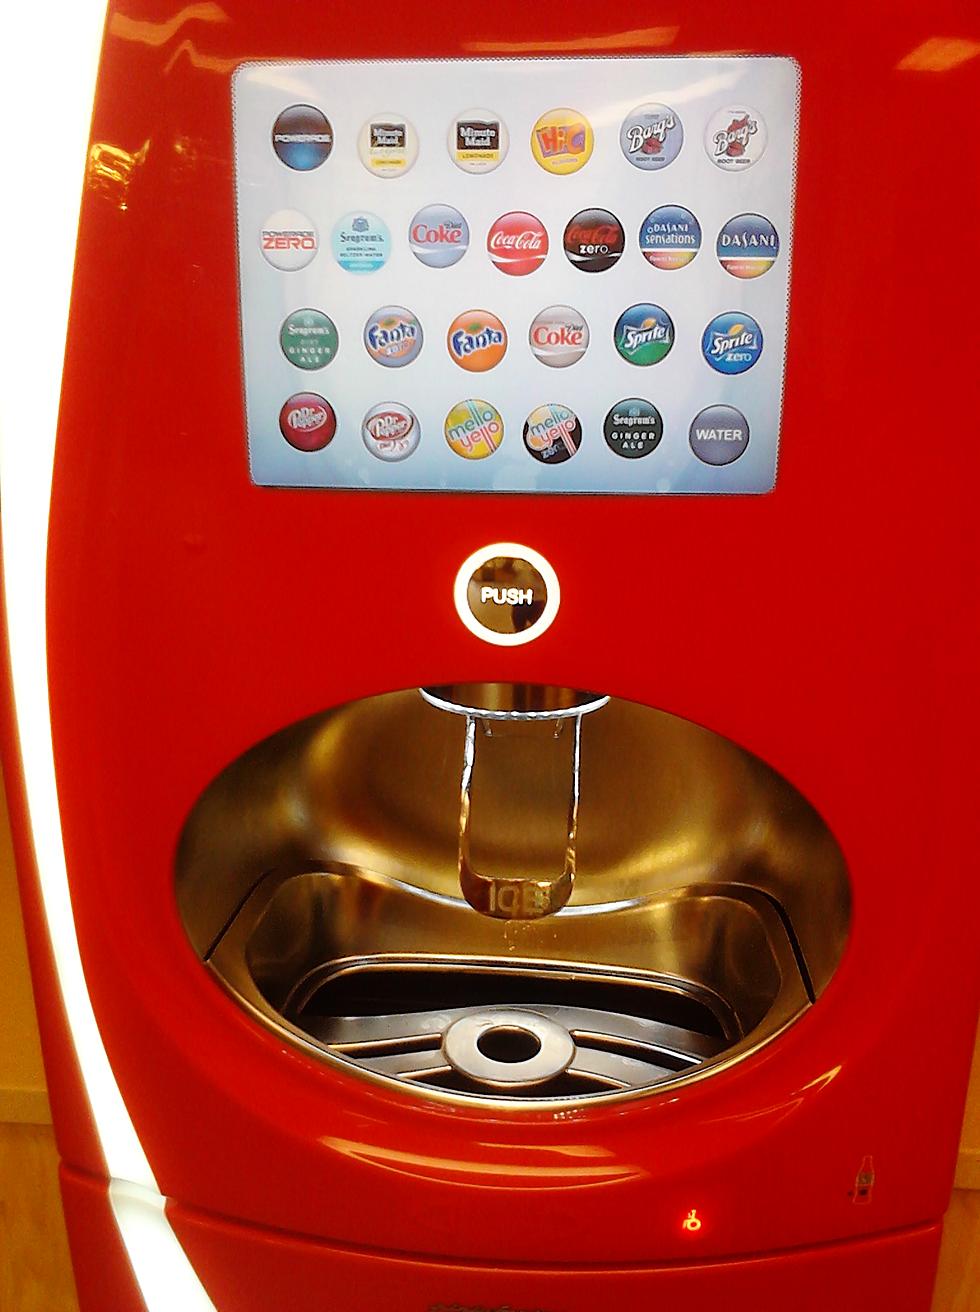 Come See The “Ferrari” of Soda Machines At Wendys in Kennewick!